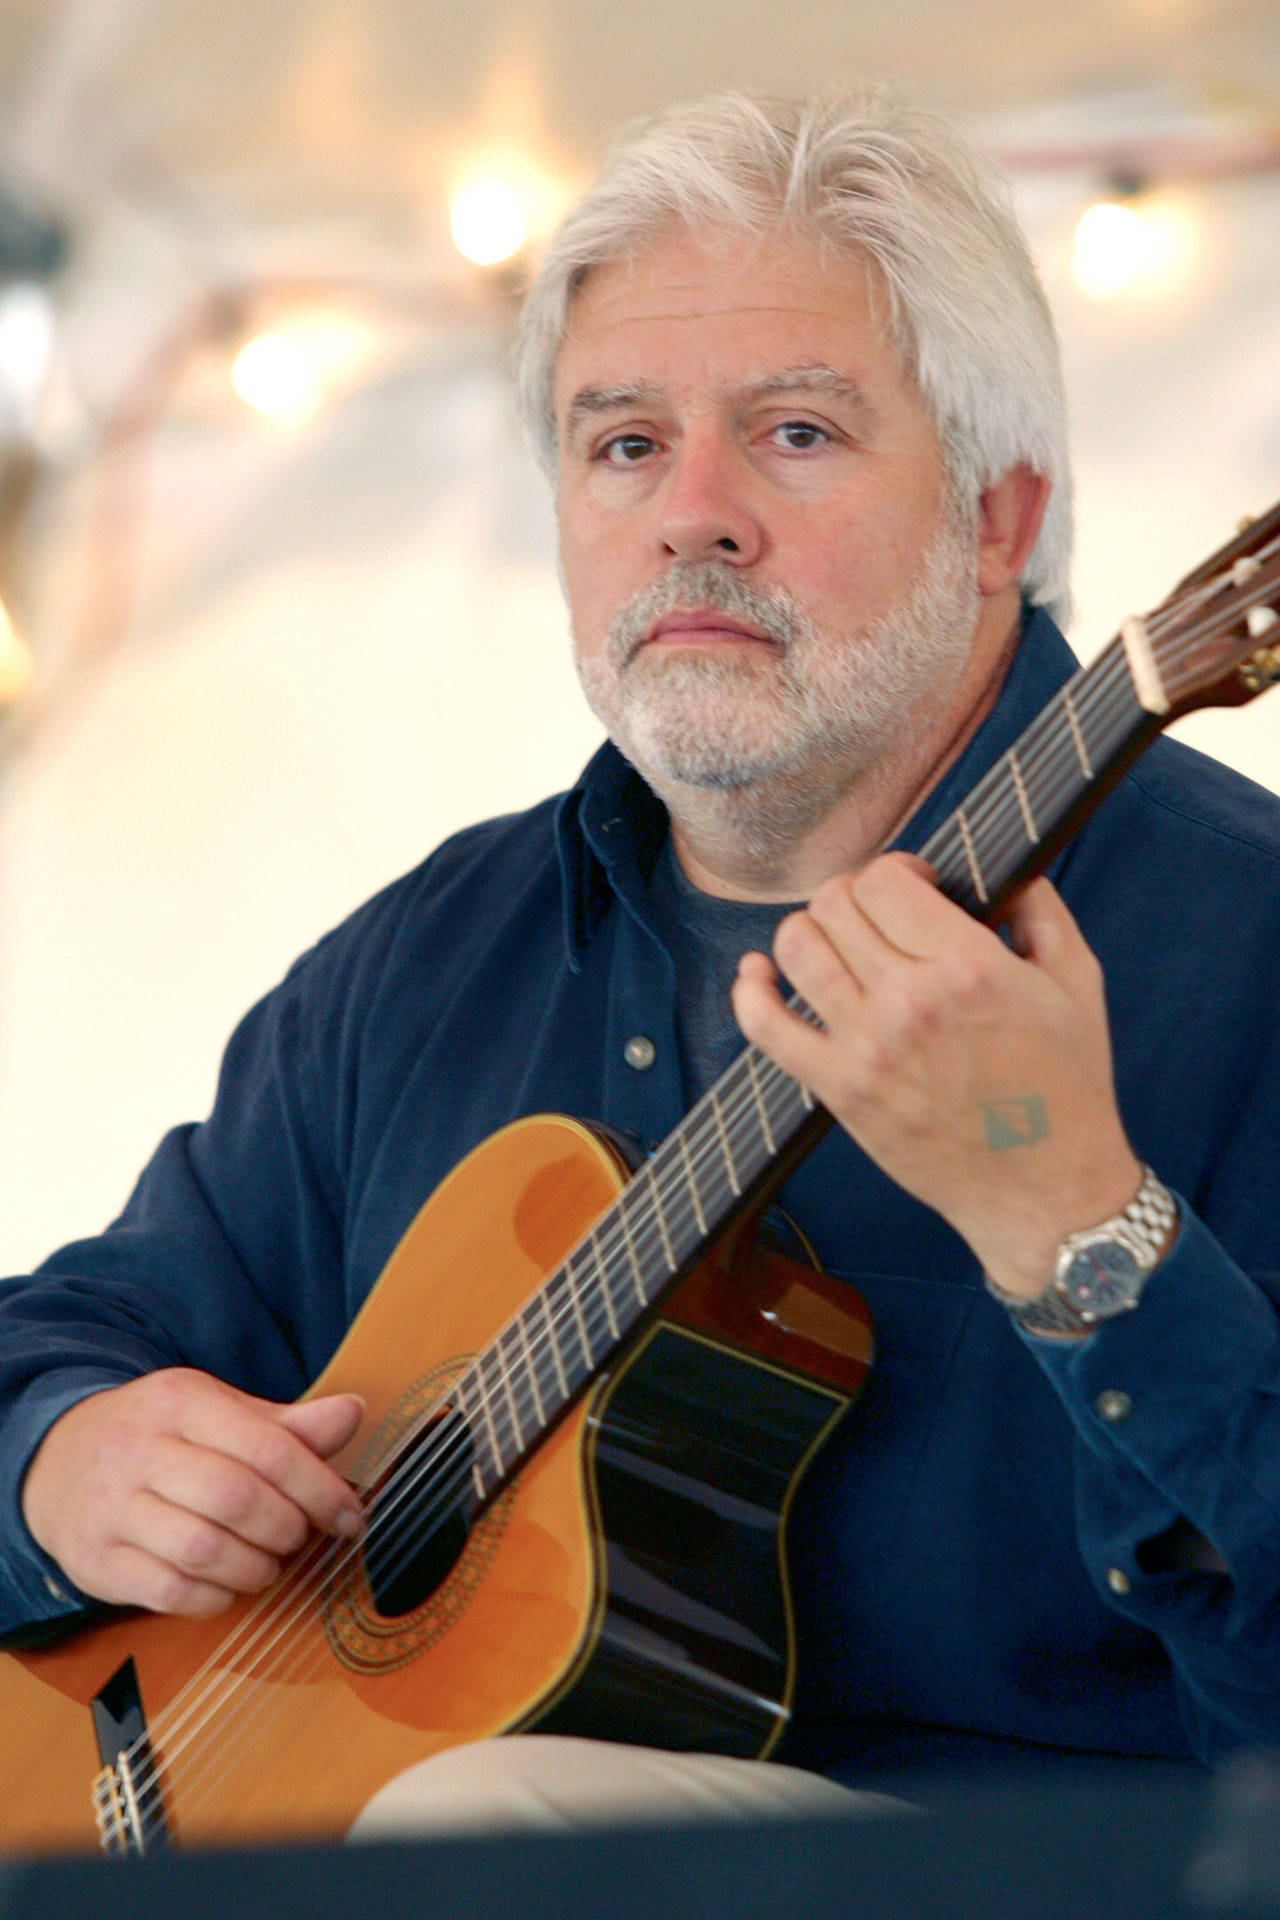 Joe Euro will perform at the Candlelight Concert in Port Townsend on Thursday.